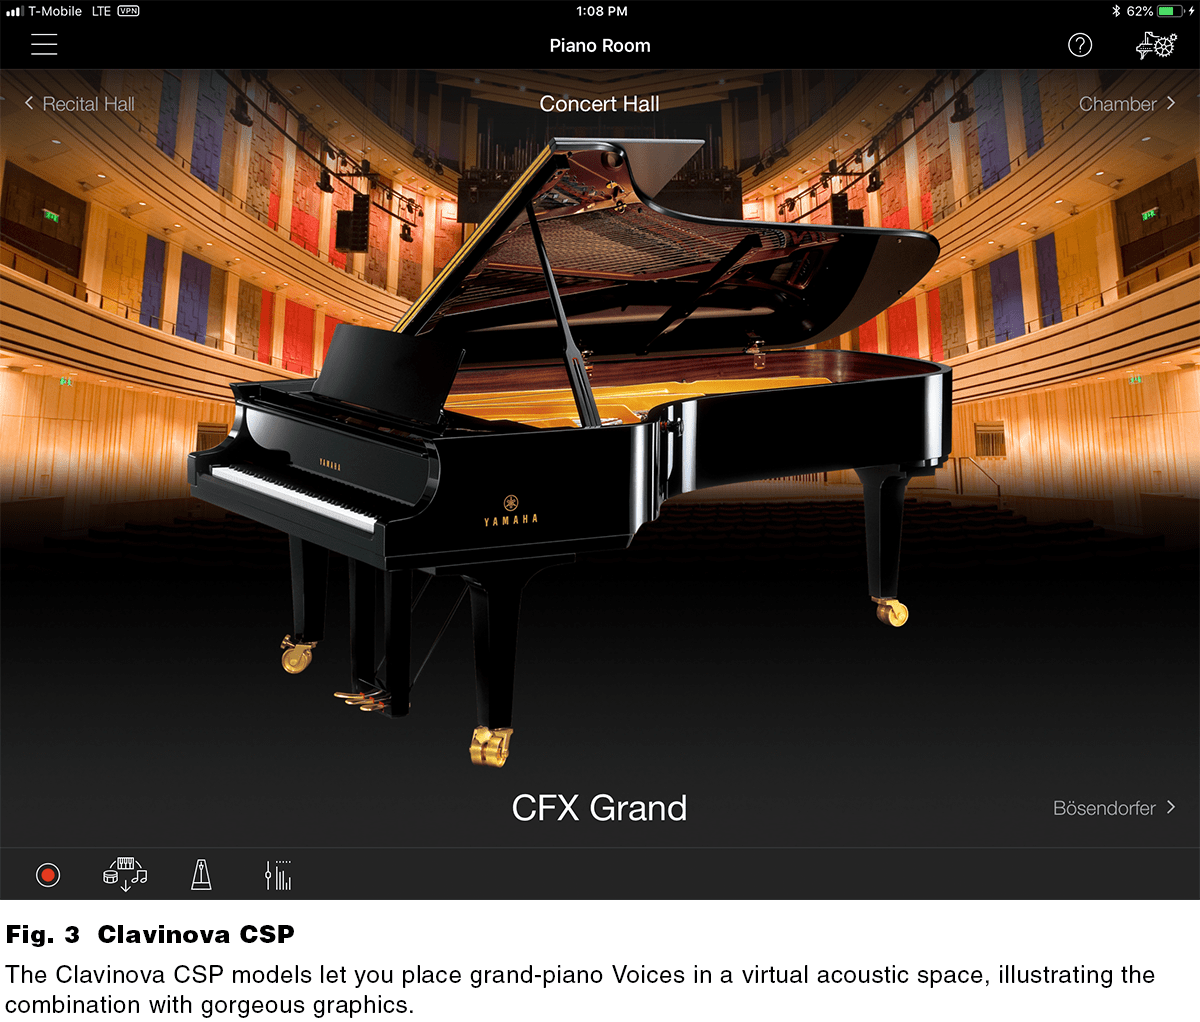 Fig. 3. The Clavinova CSP models let you place grand-piano Voices in a virtual acoustic space, illustrating the combination with gorgeous graphics.